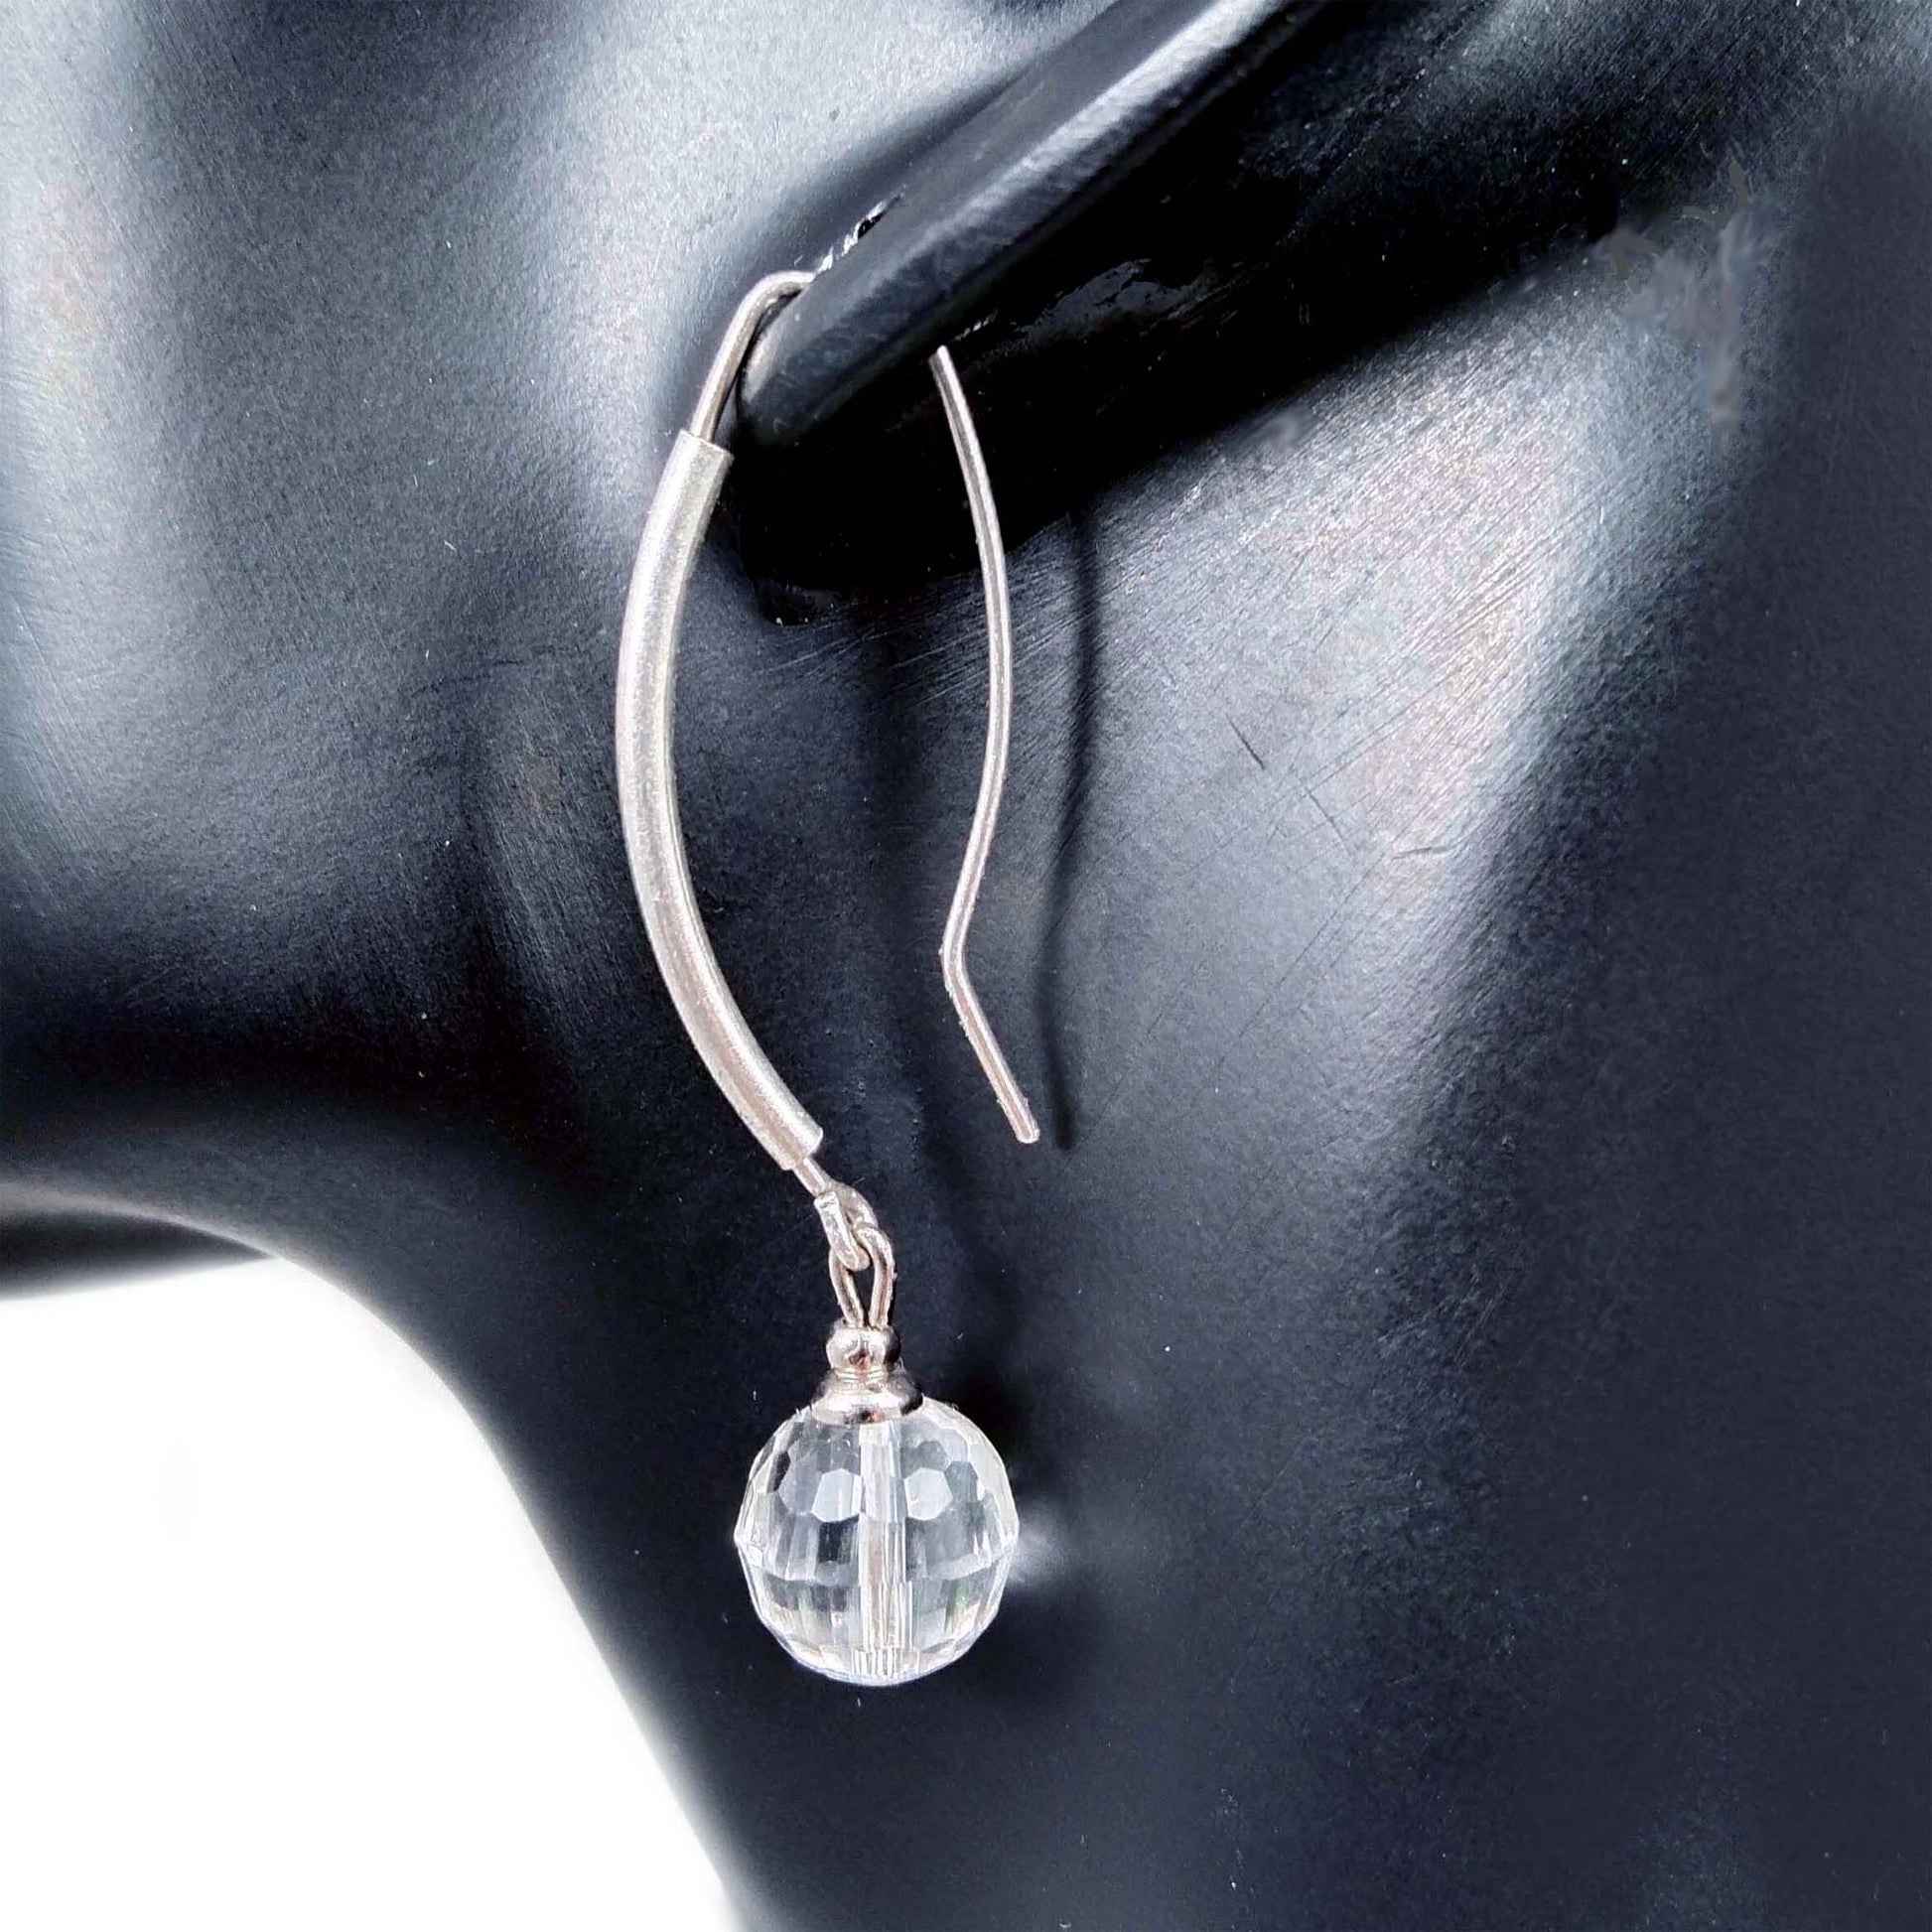 Faceted clear quartz ball earrings with long silver ear hooks